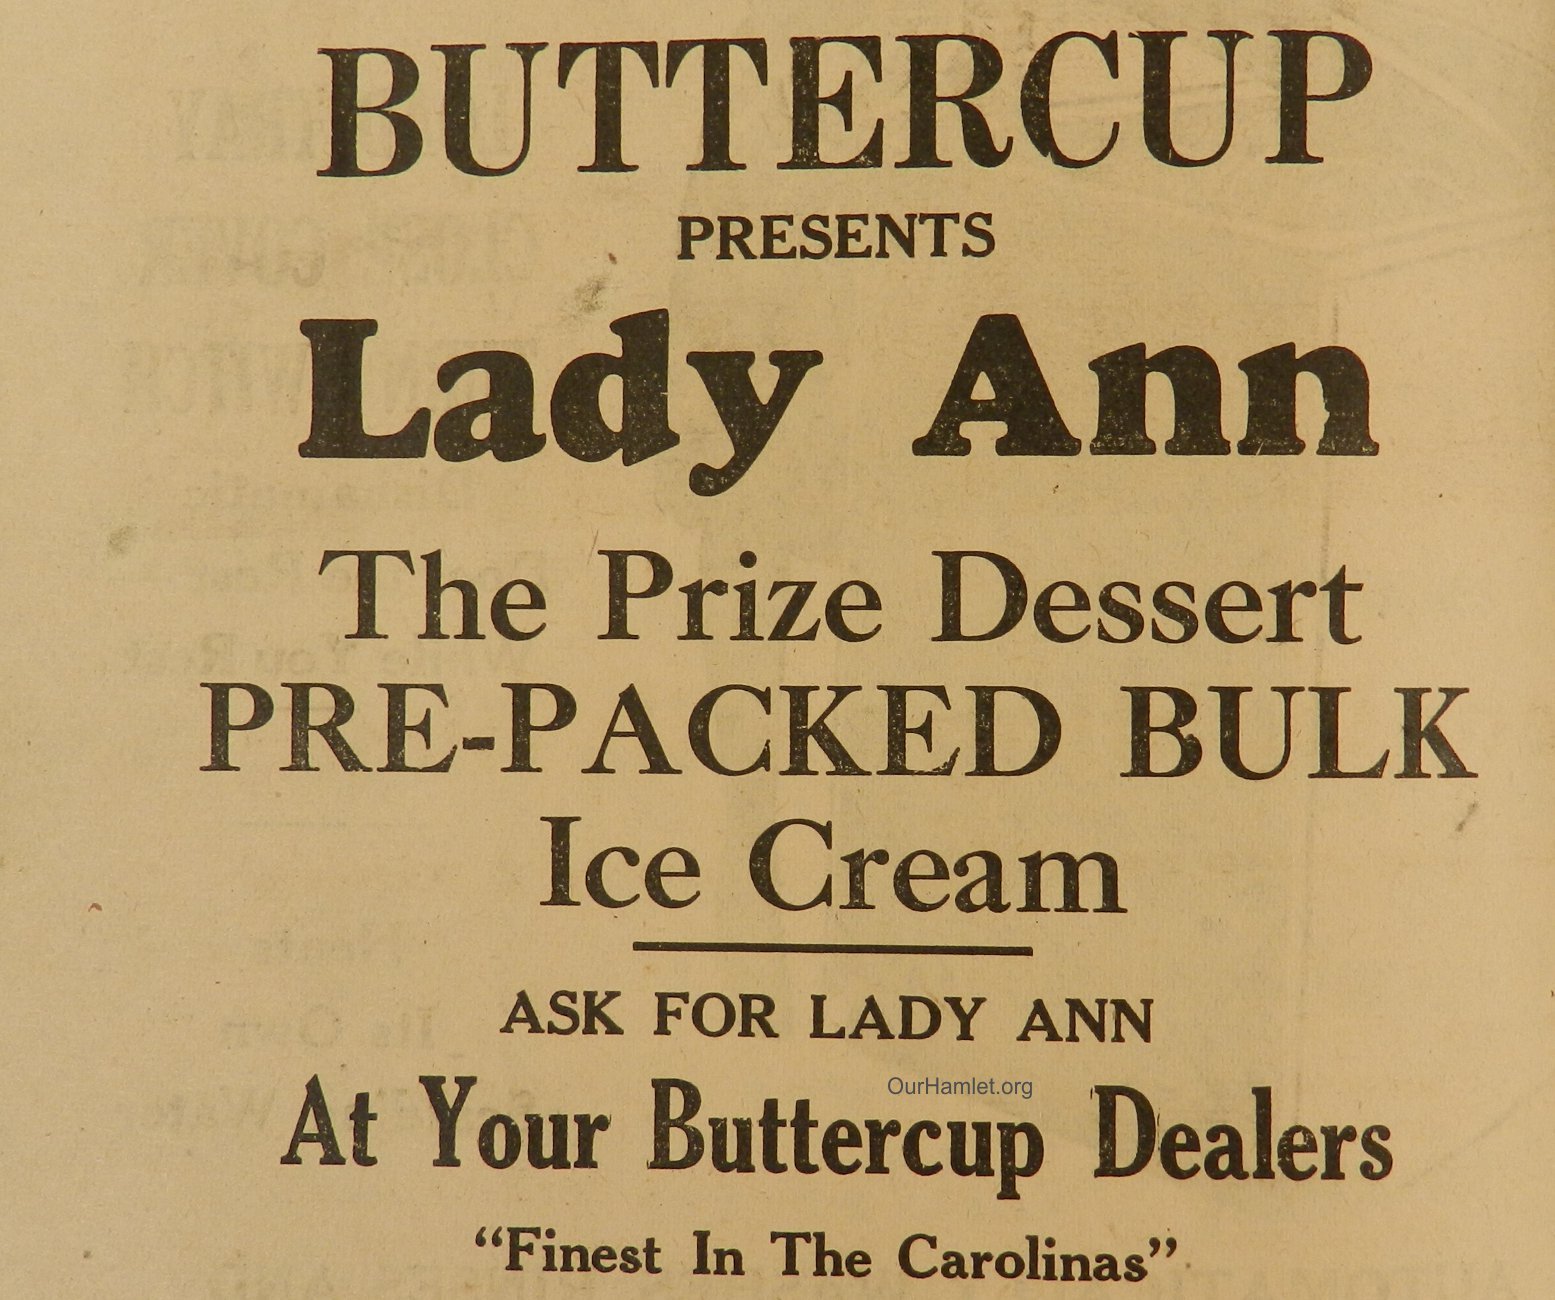 1947 Buttercup ad OH.jpg